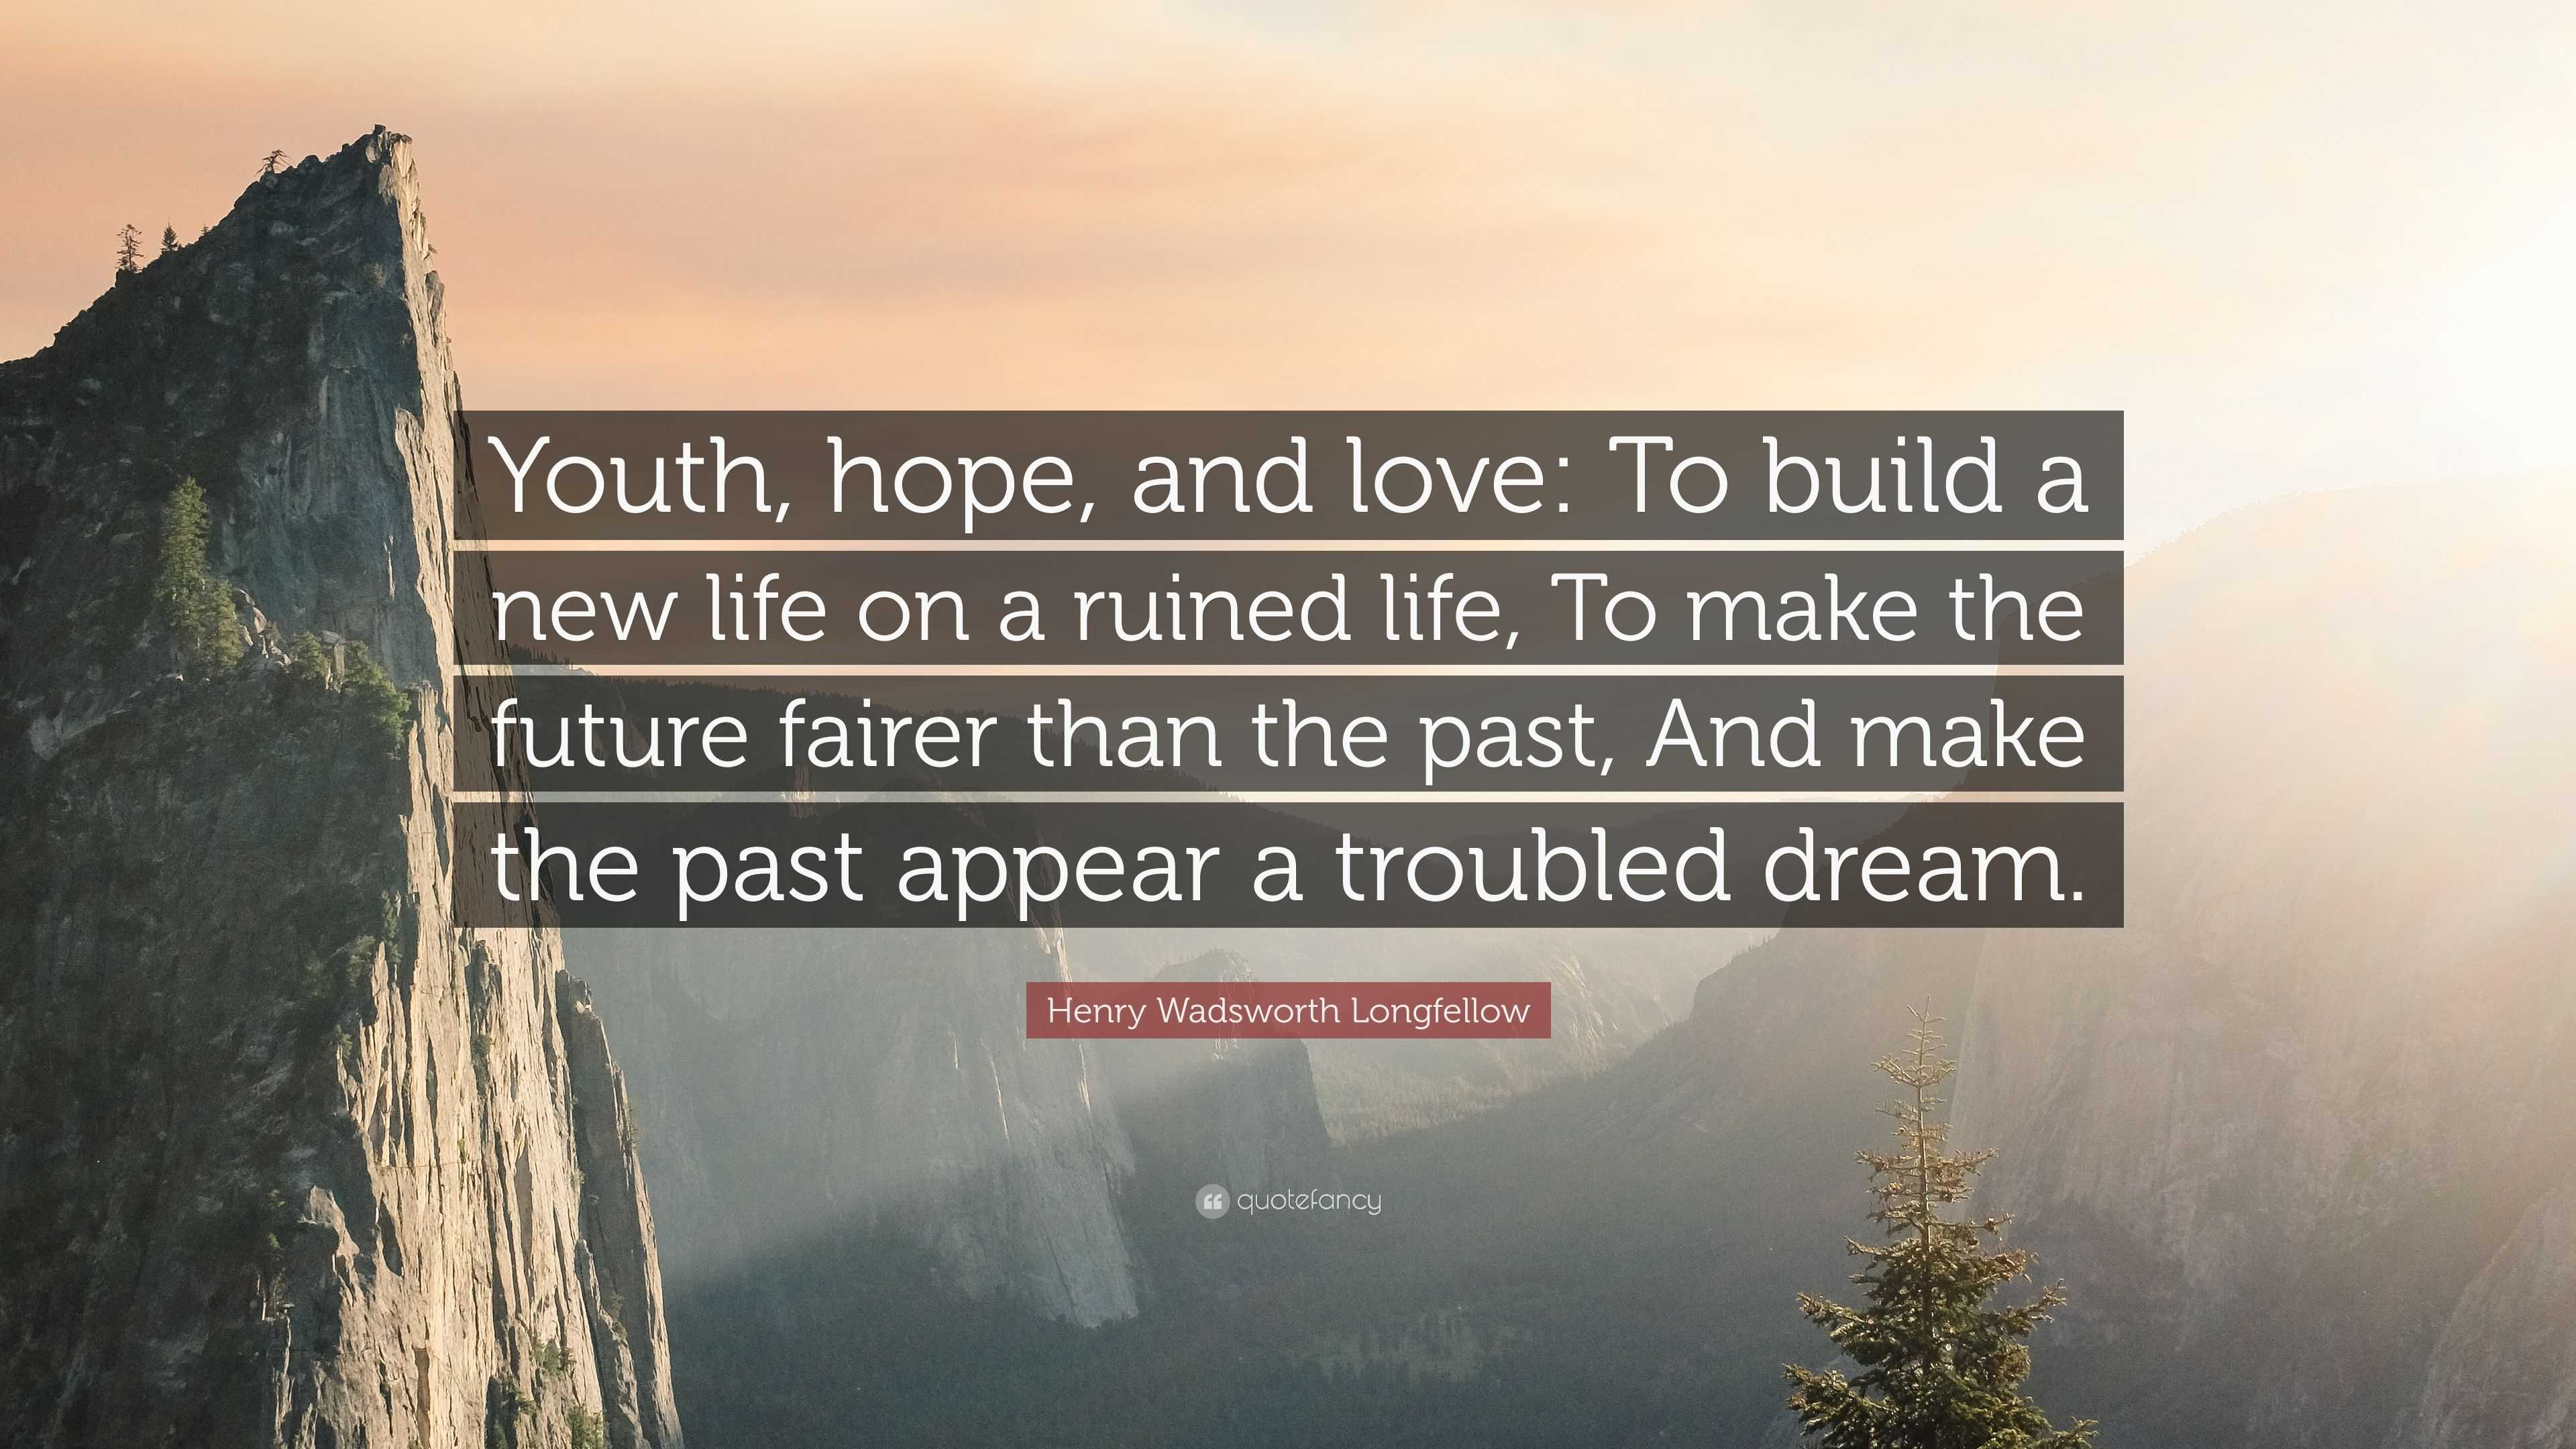 Henry Wadsworth Longfellow Quote “Youth hope and love To build a